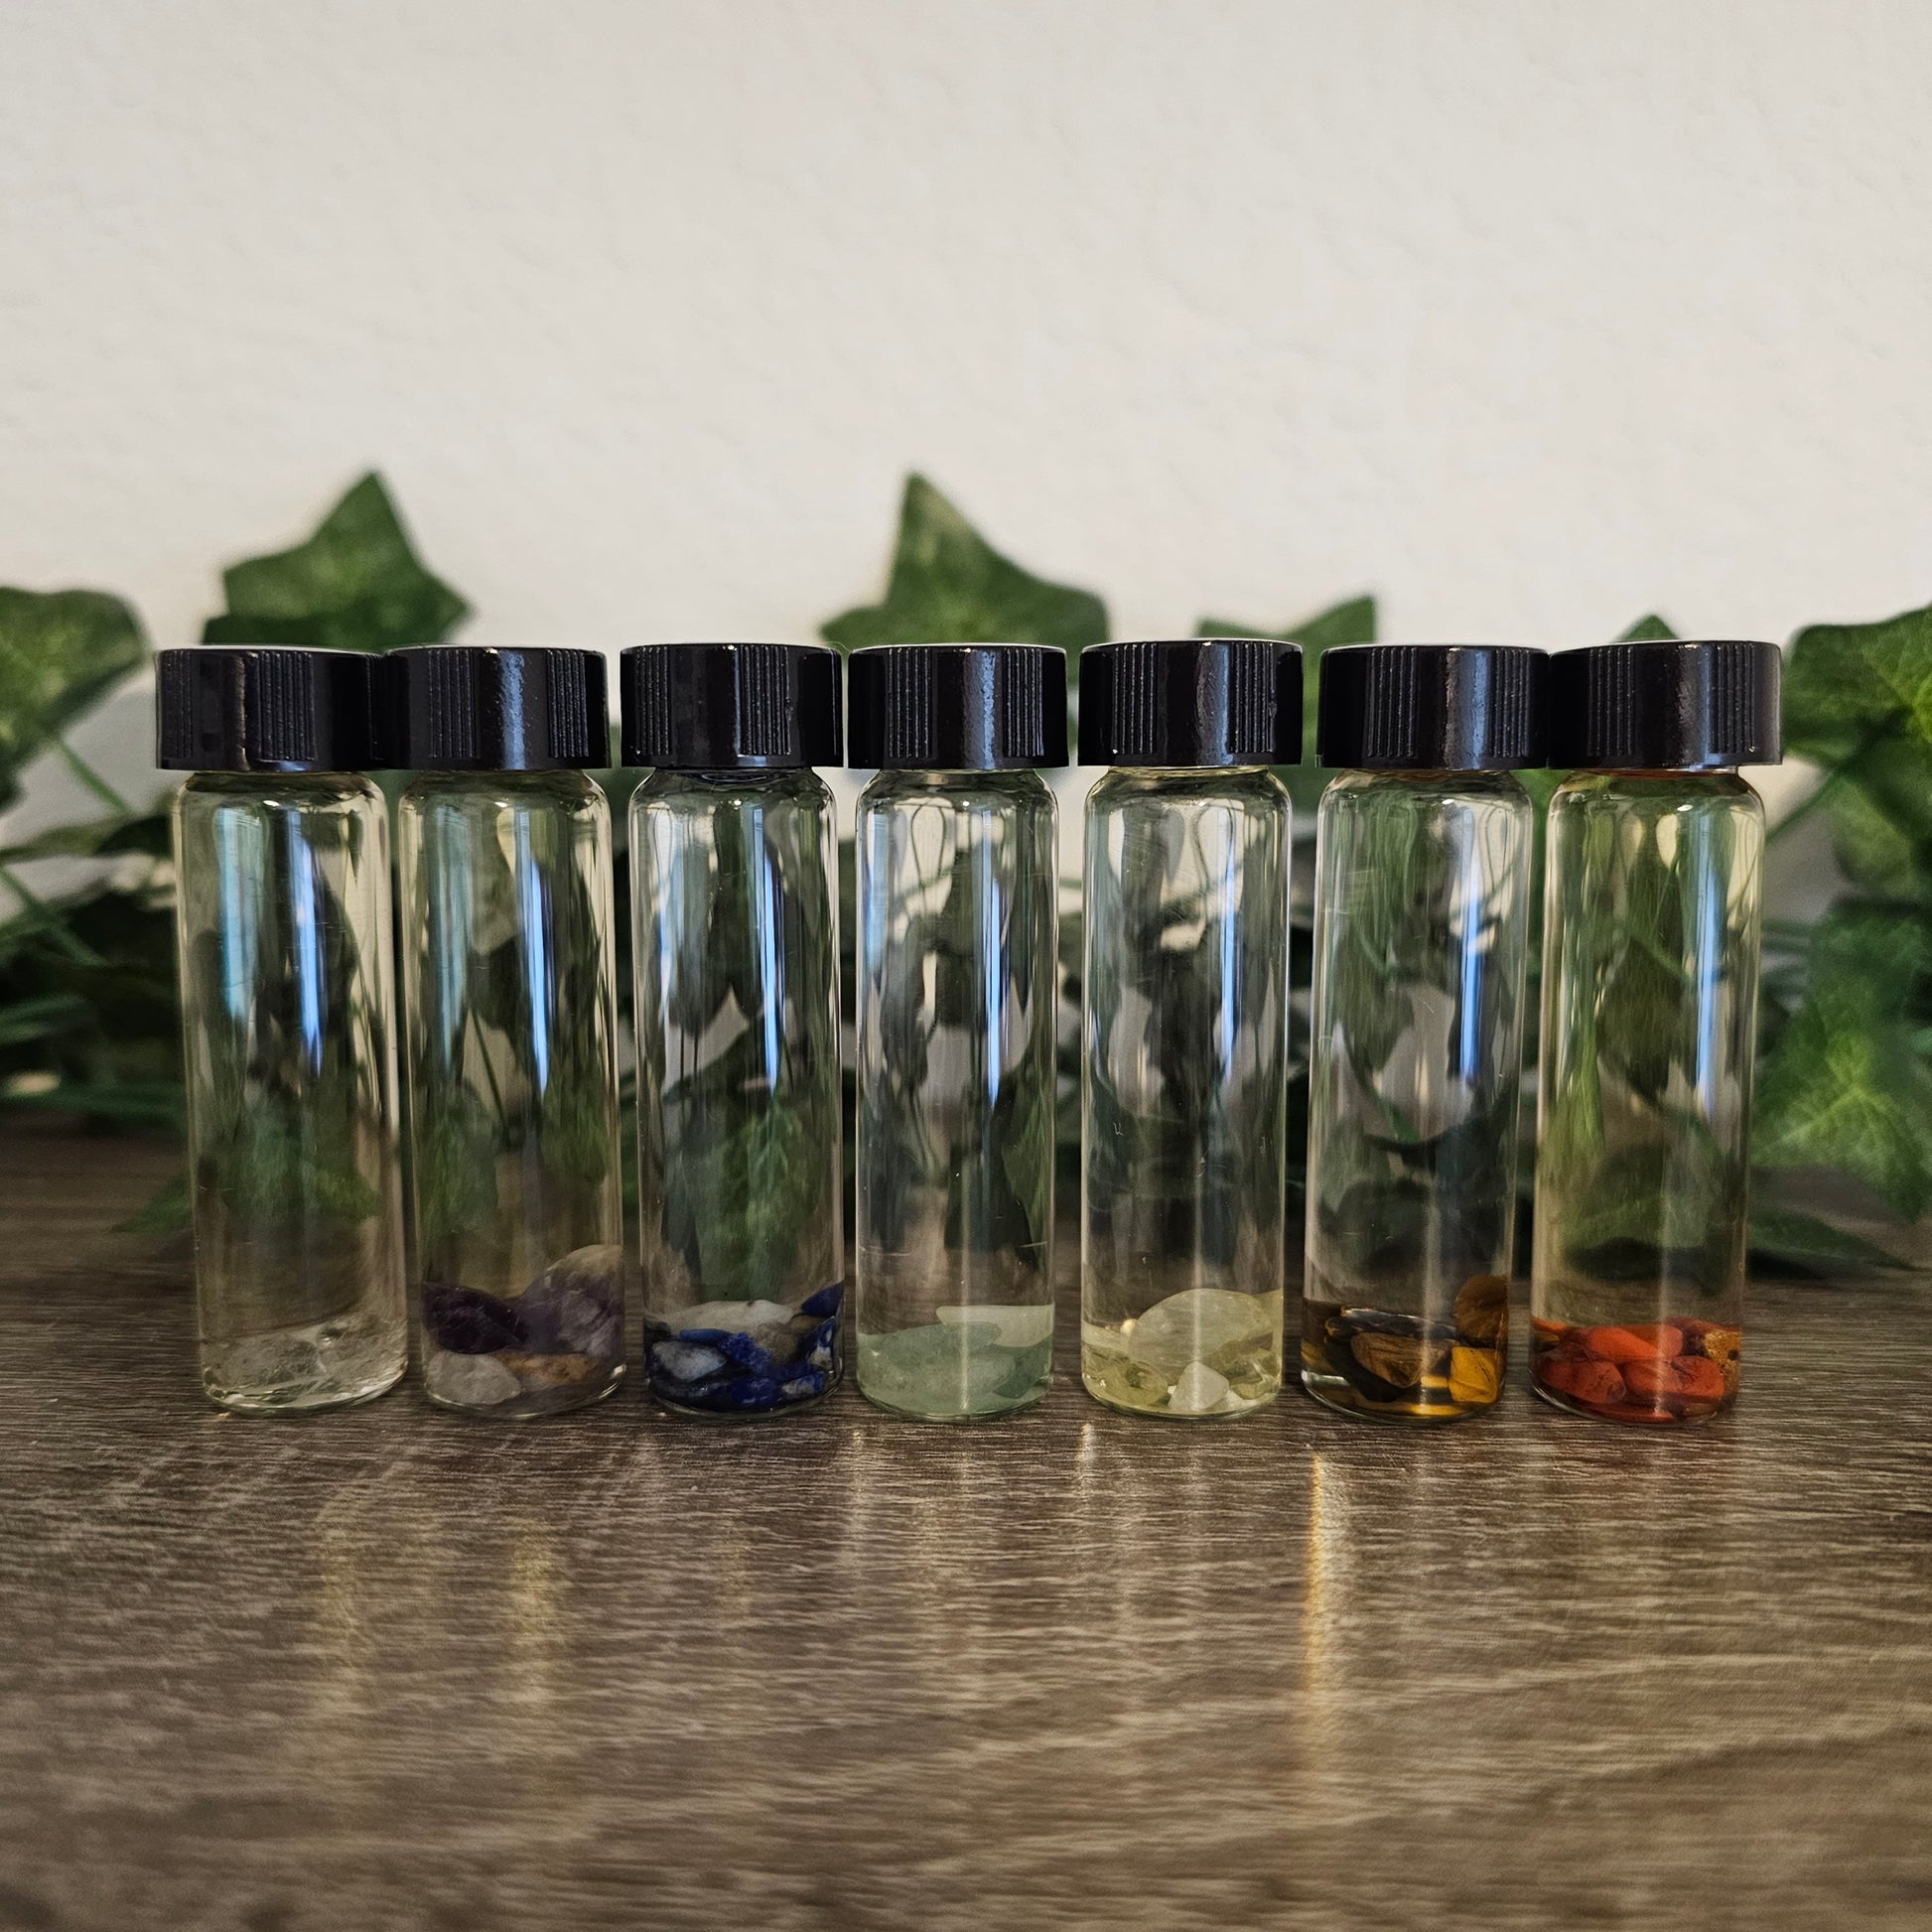 CHAKRA Oil - cleansing, aligning, and unblocking - Smudging, Meditation, Yoga, Clearing - Ritual & Altar Tools